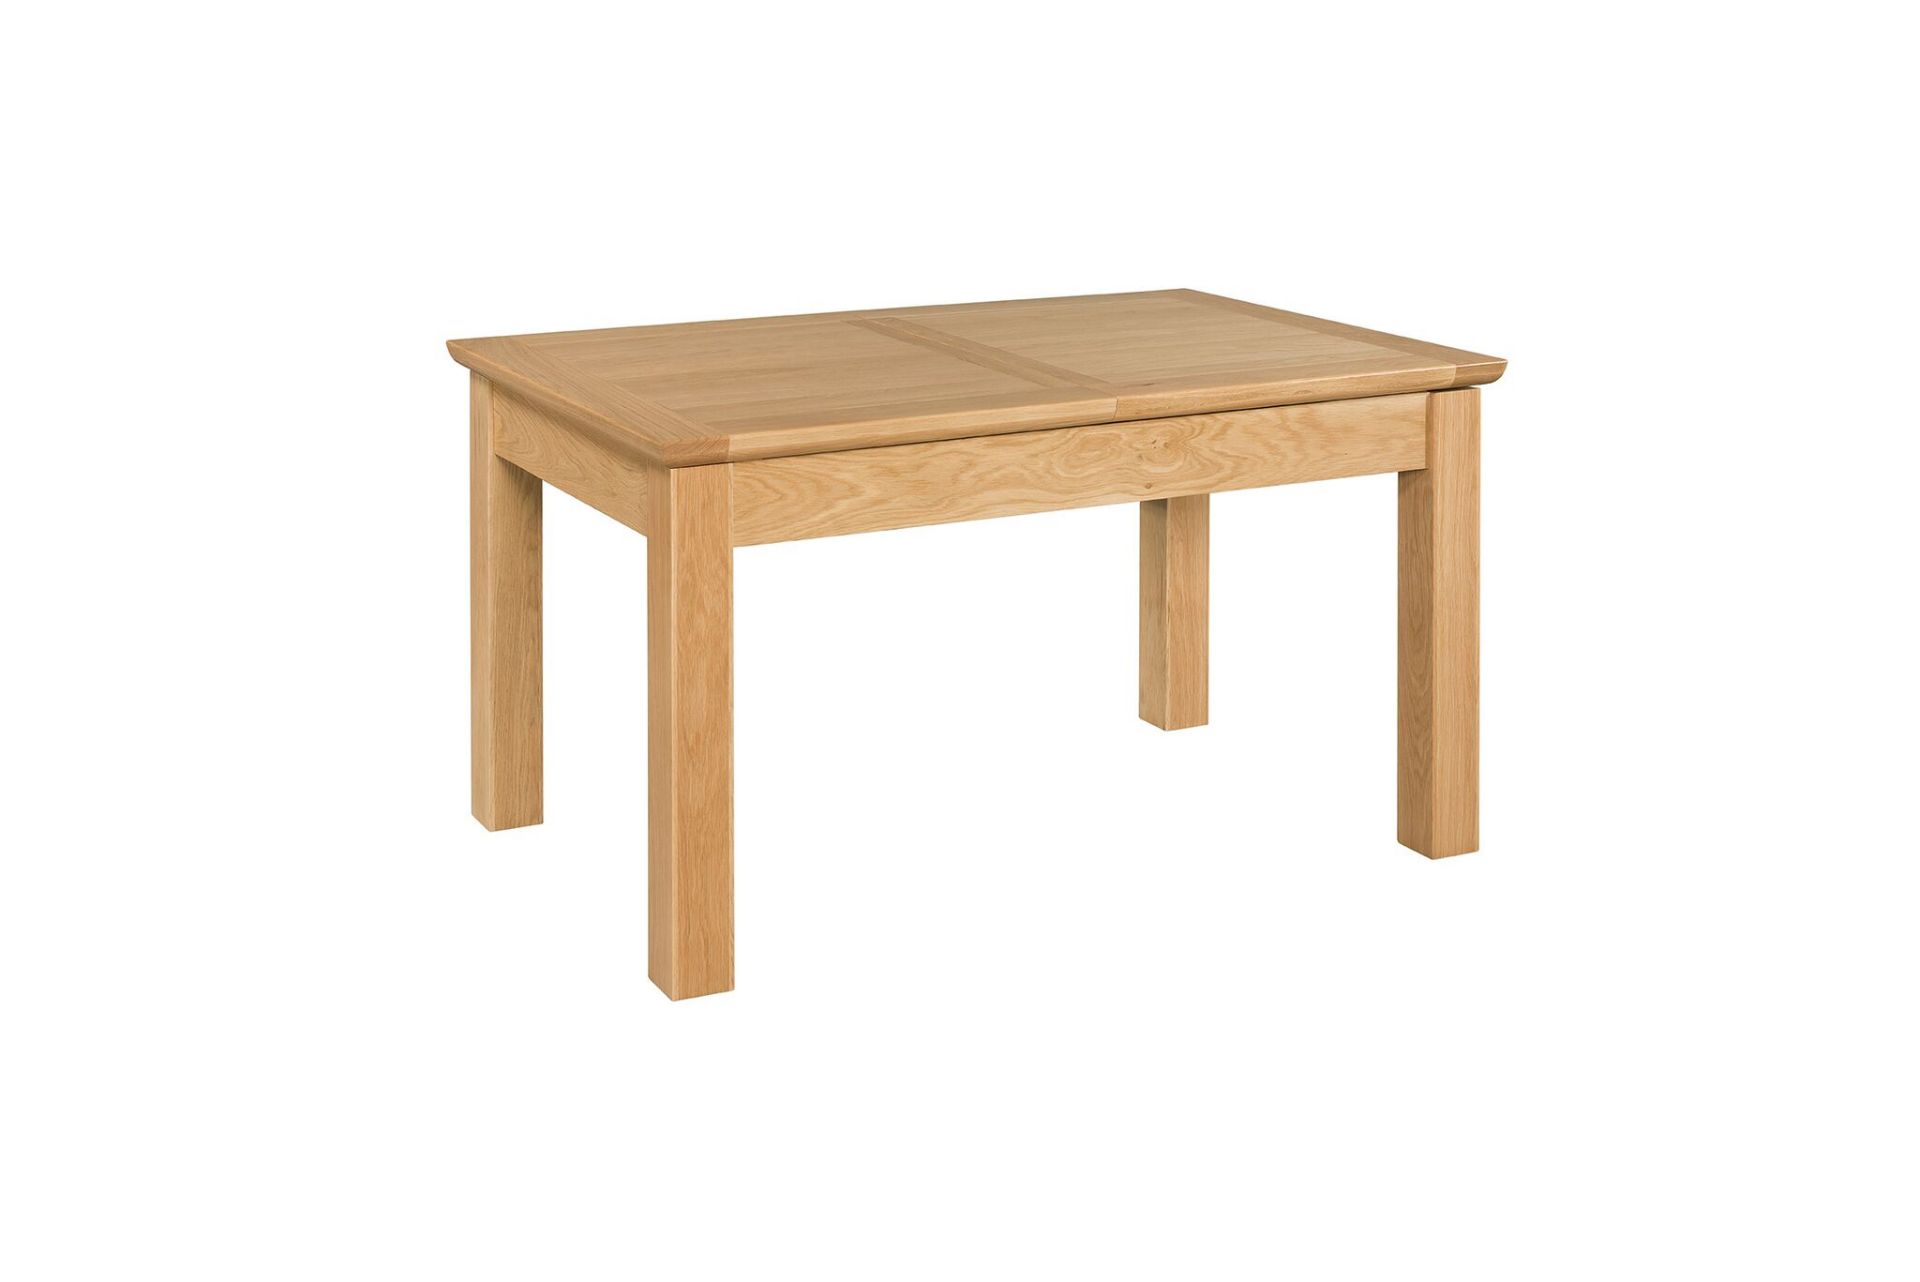 V *TRADE QTY* Brand New Siena 120x80 Butterfly Extension Table (extends to 160 cm) RRP419 (